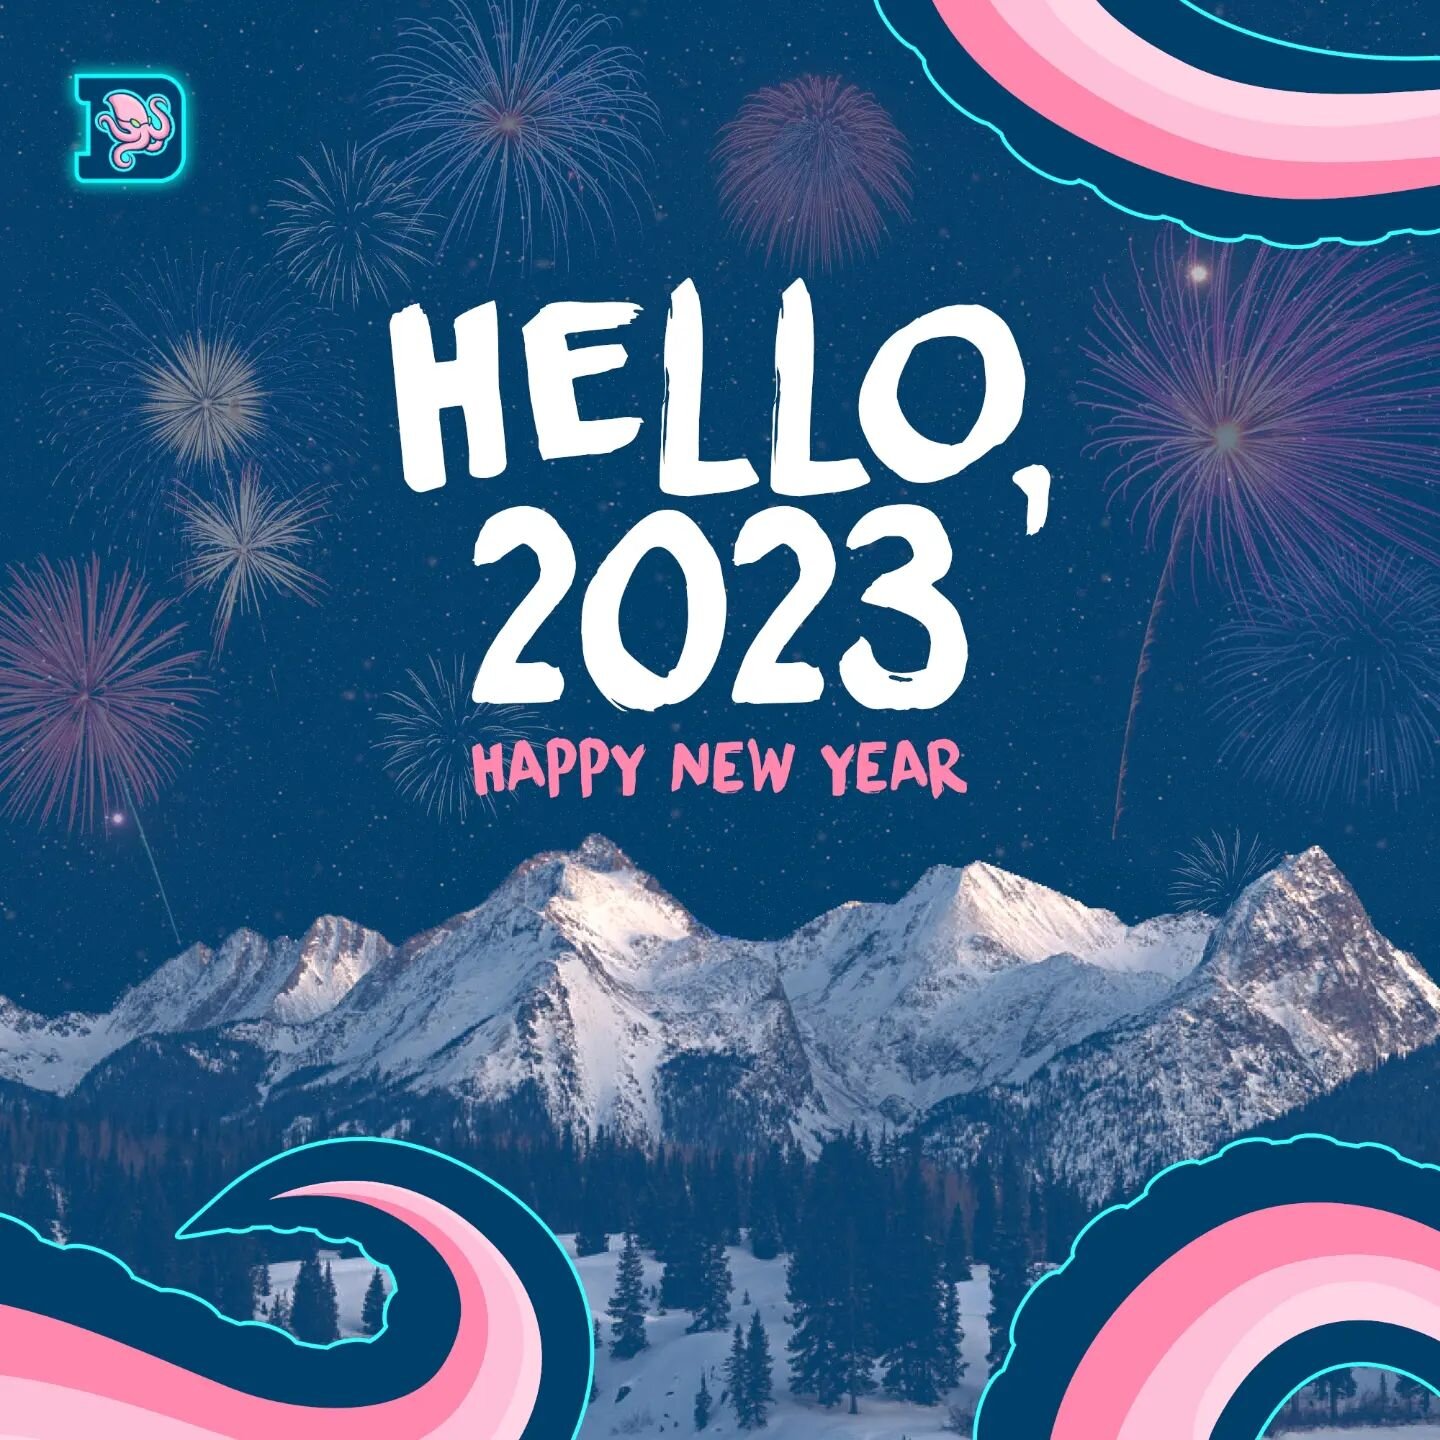 2023... I'm feeling that your good! What's your goals for 2023?